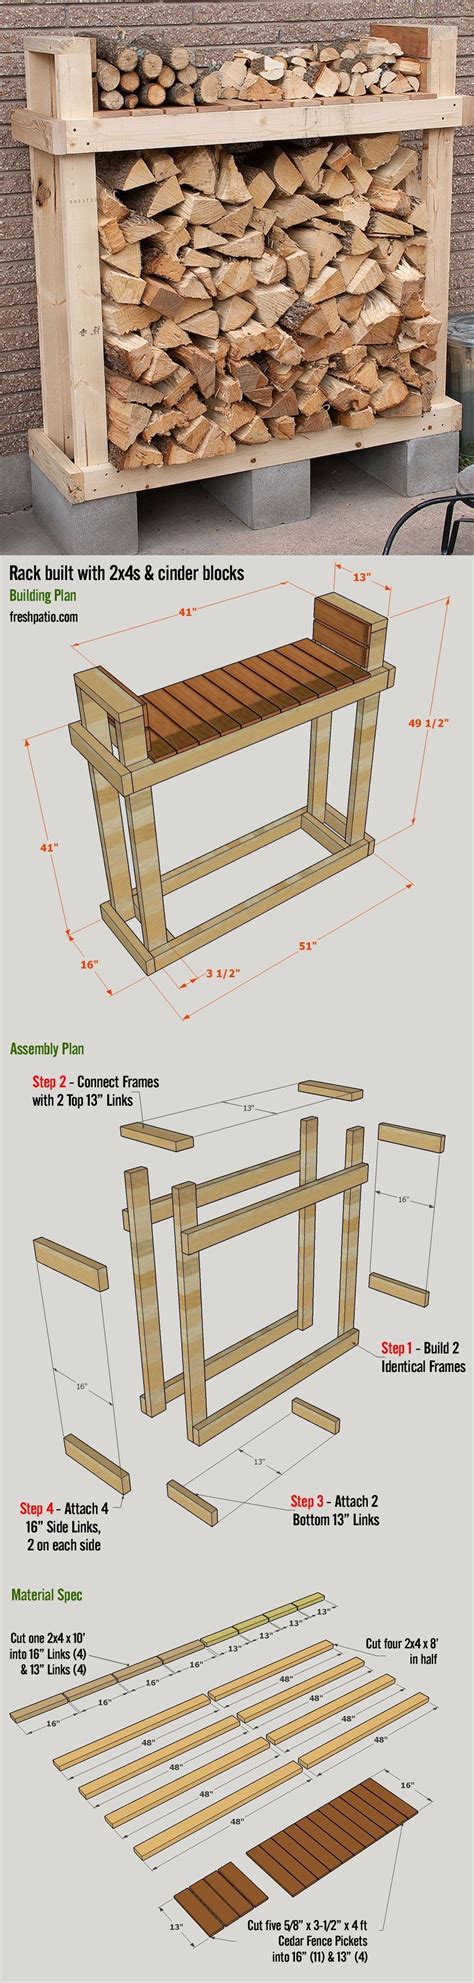 Free Firewood Rack Plan Build It For Including Lumber Cinder Blocks And Screws With A